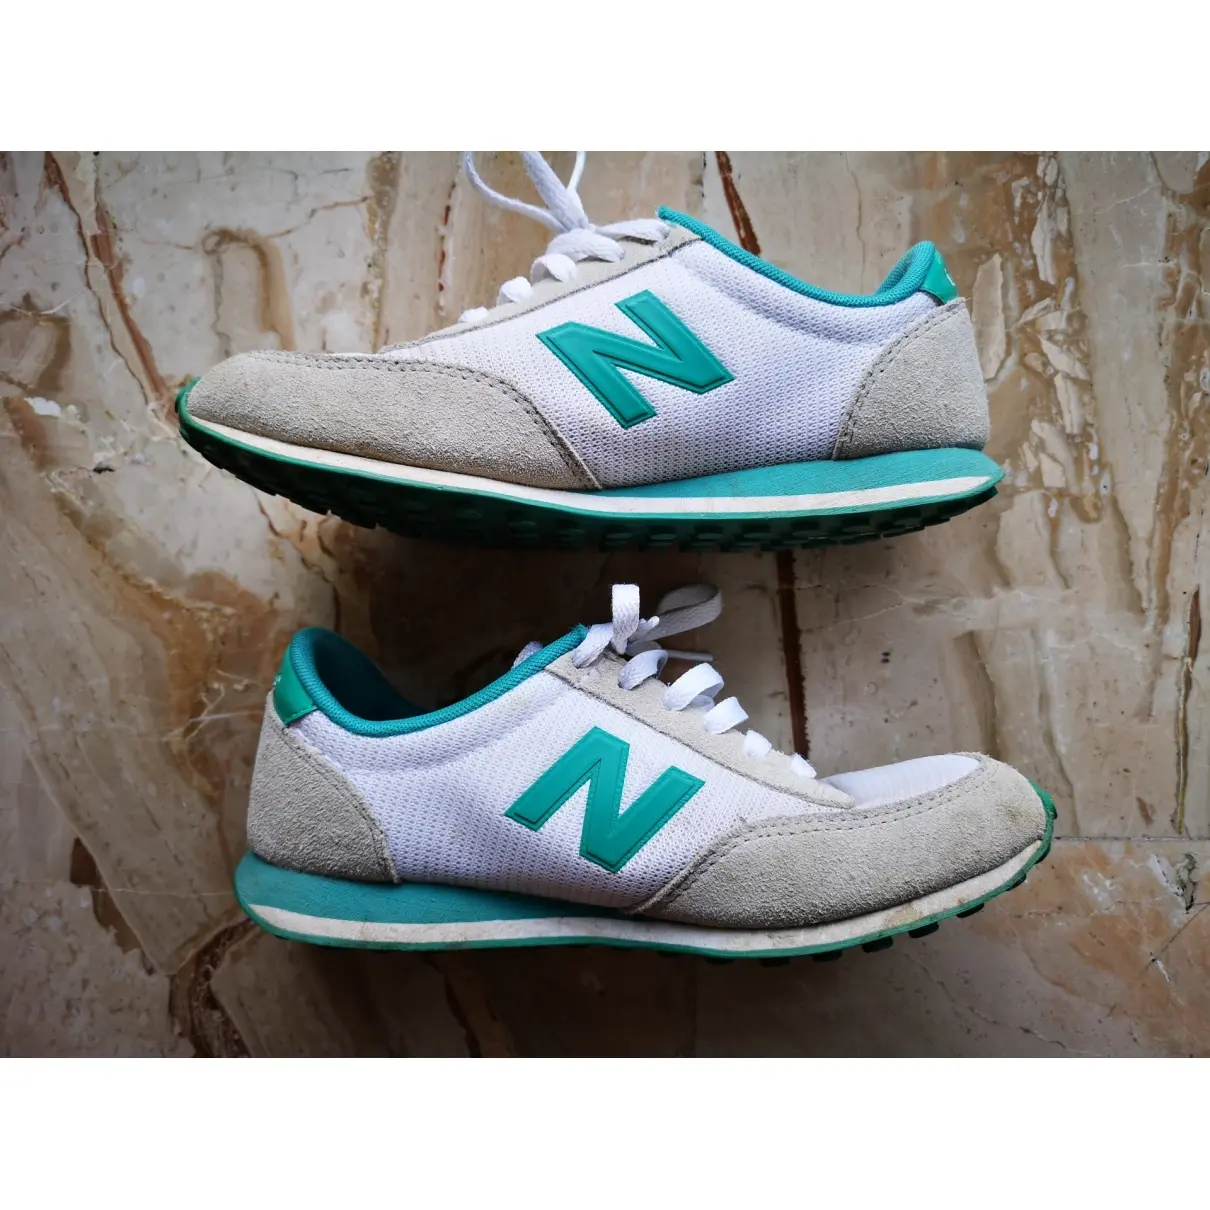 New Balance Cloth trainers for sale